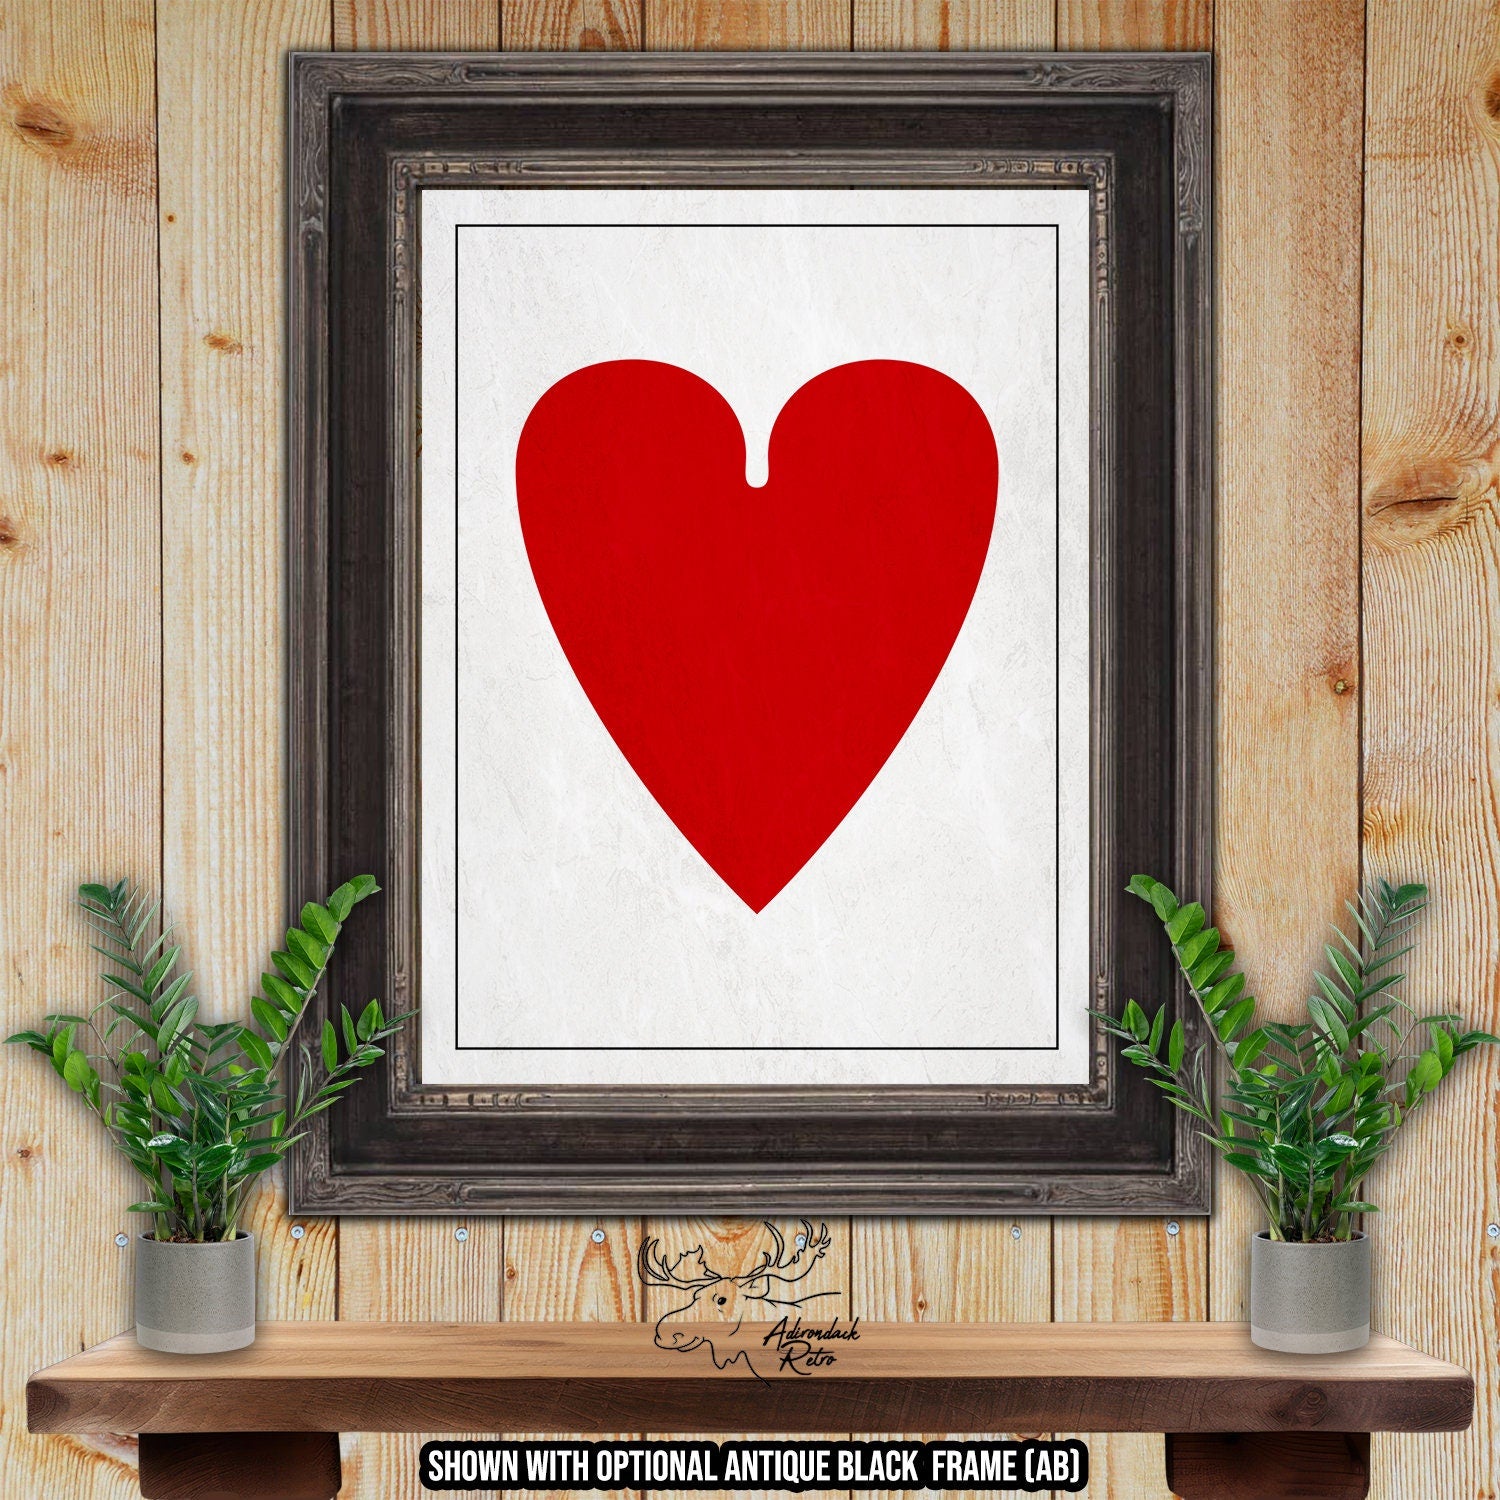 Hearts Playing Card Suit Giclee Fine Art Print at Adirondack Retro